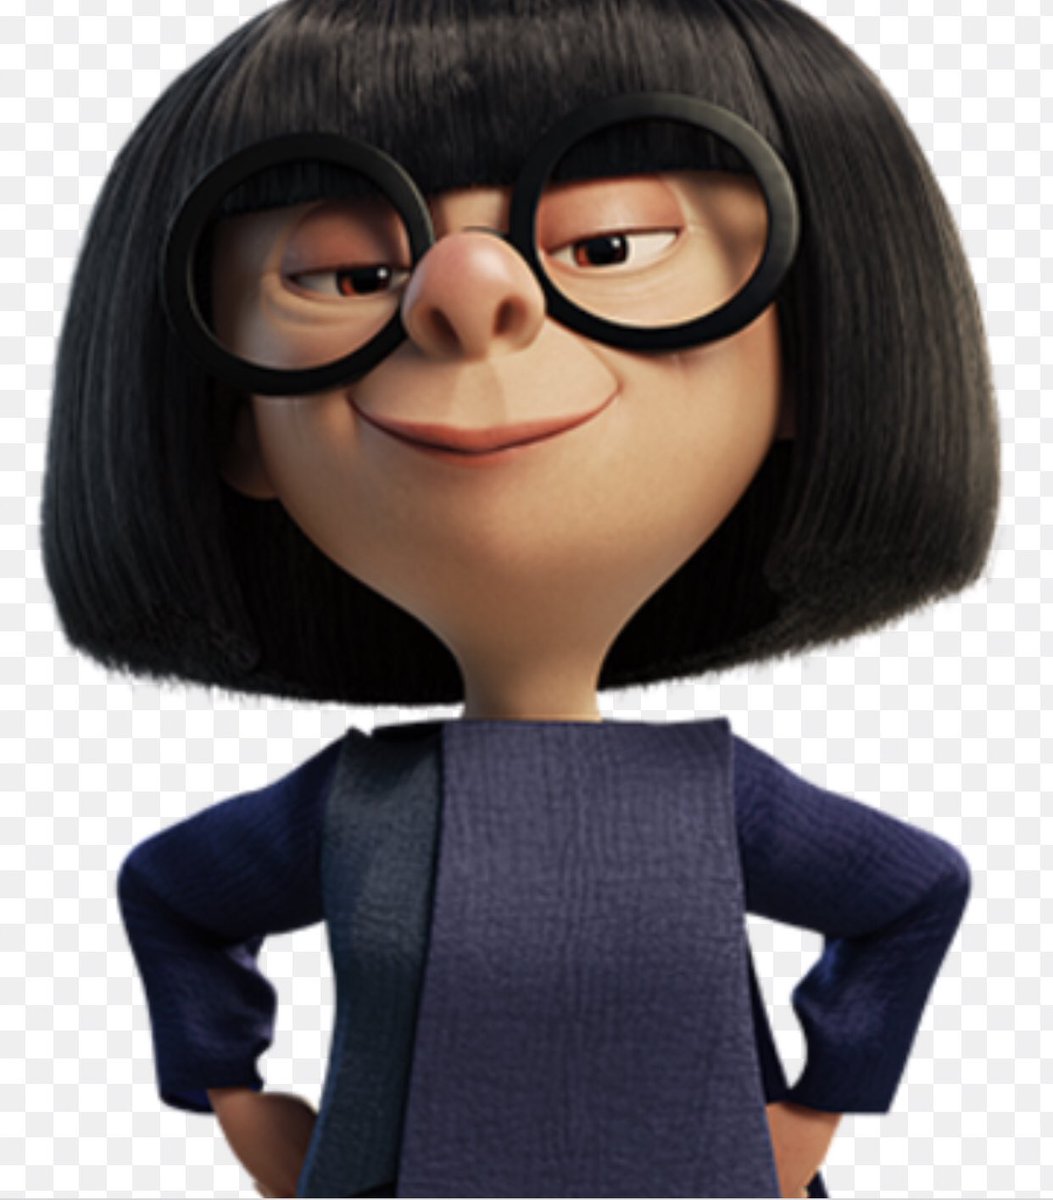 Why does the person on the right lookin like Edna from the incredibles.